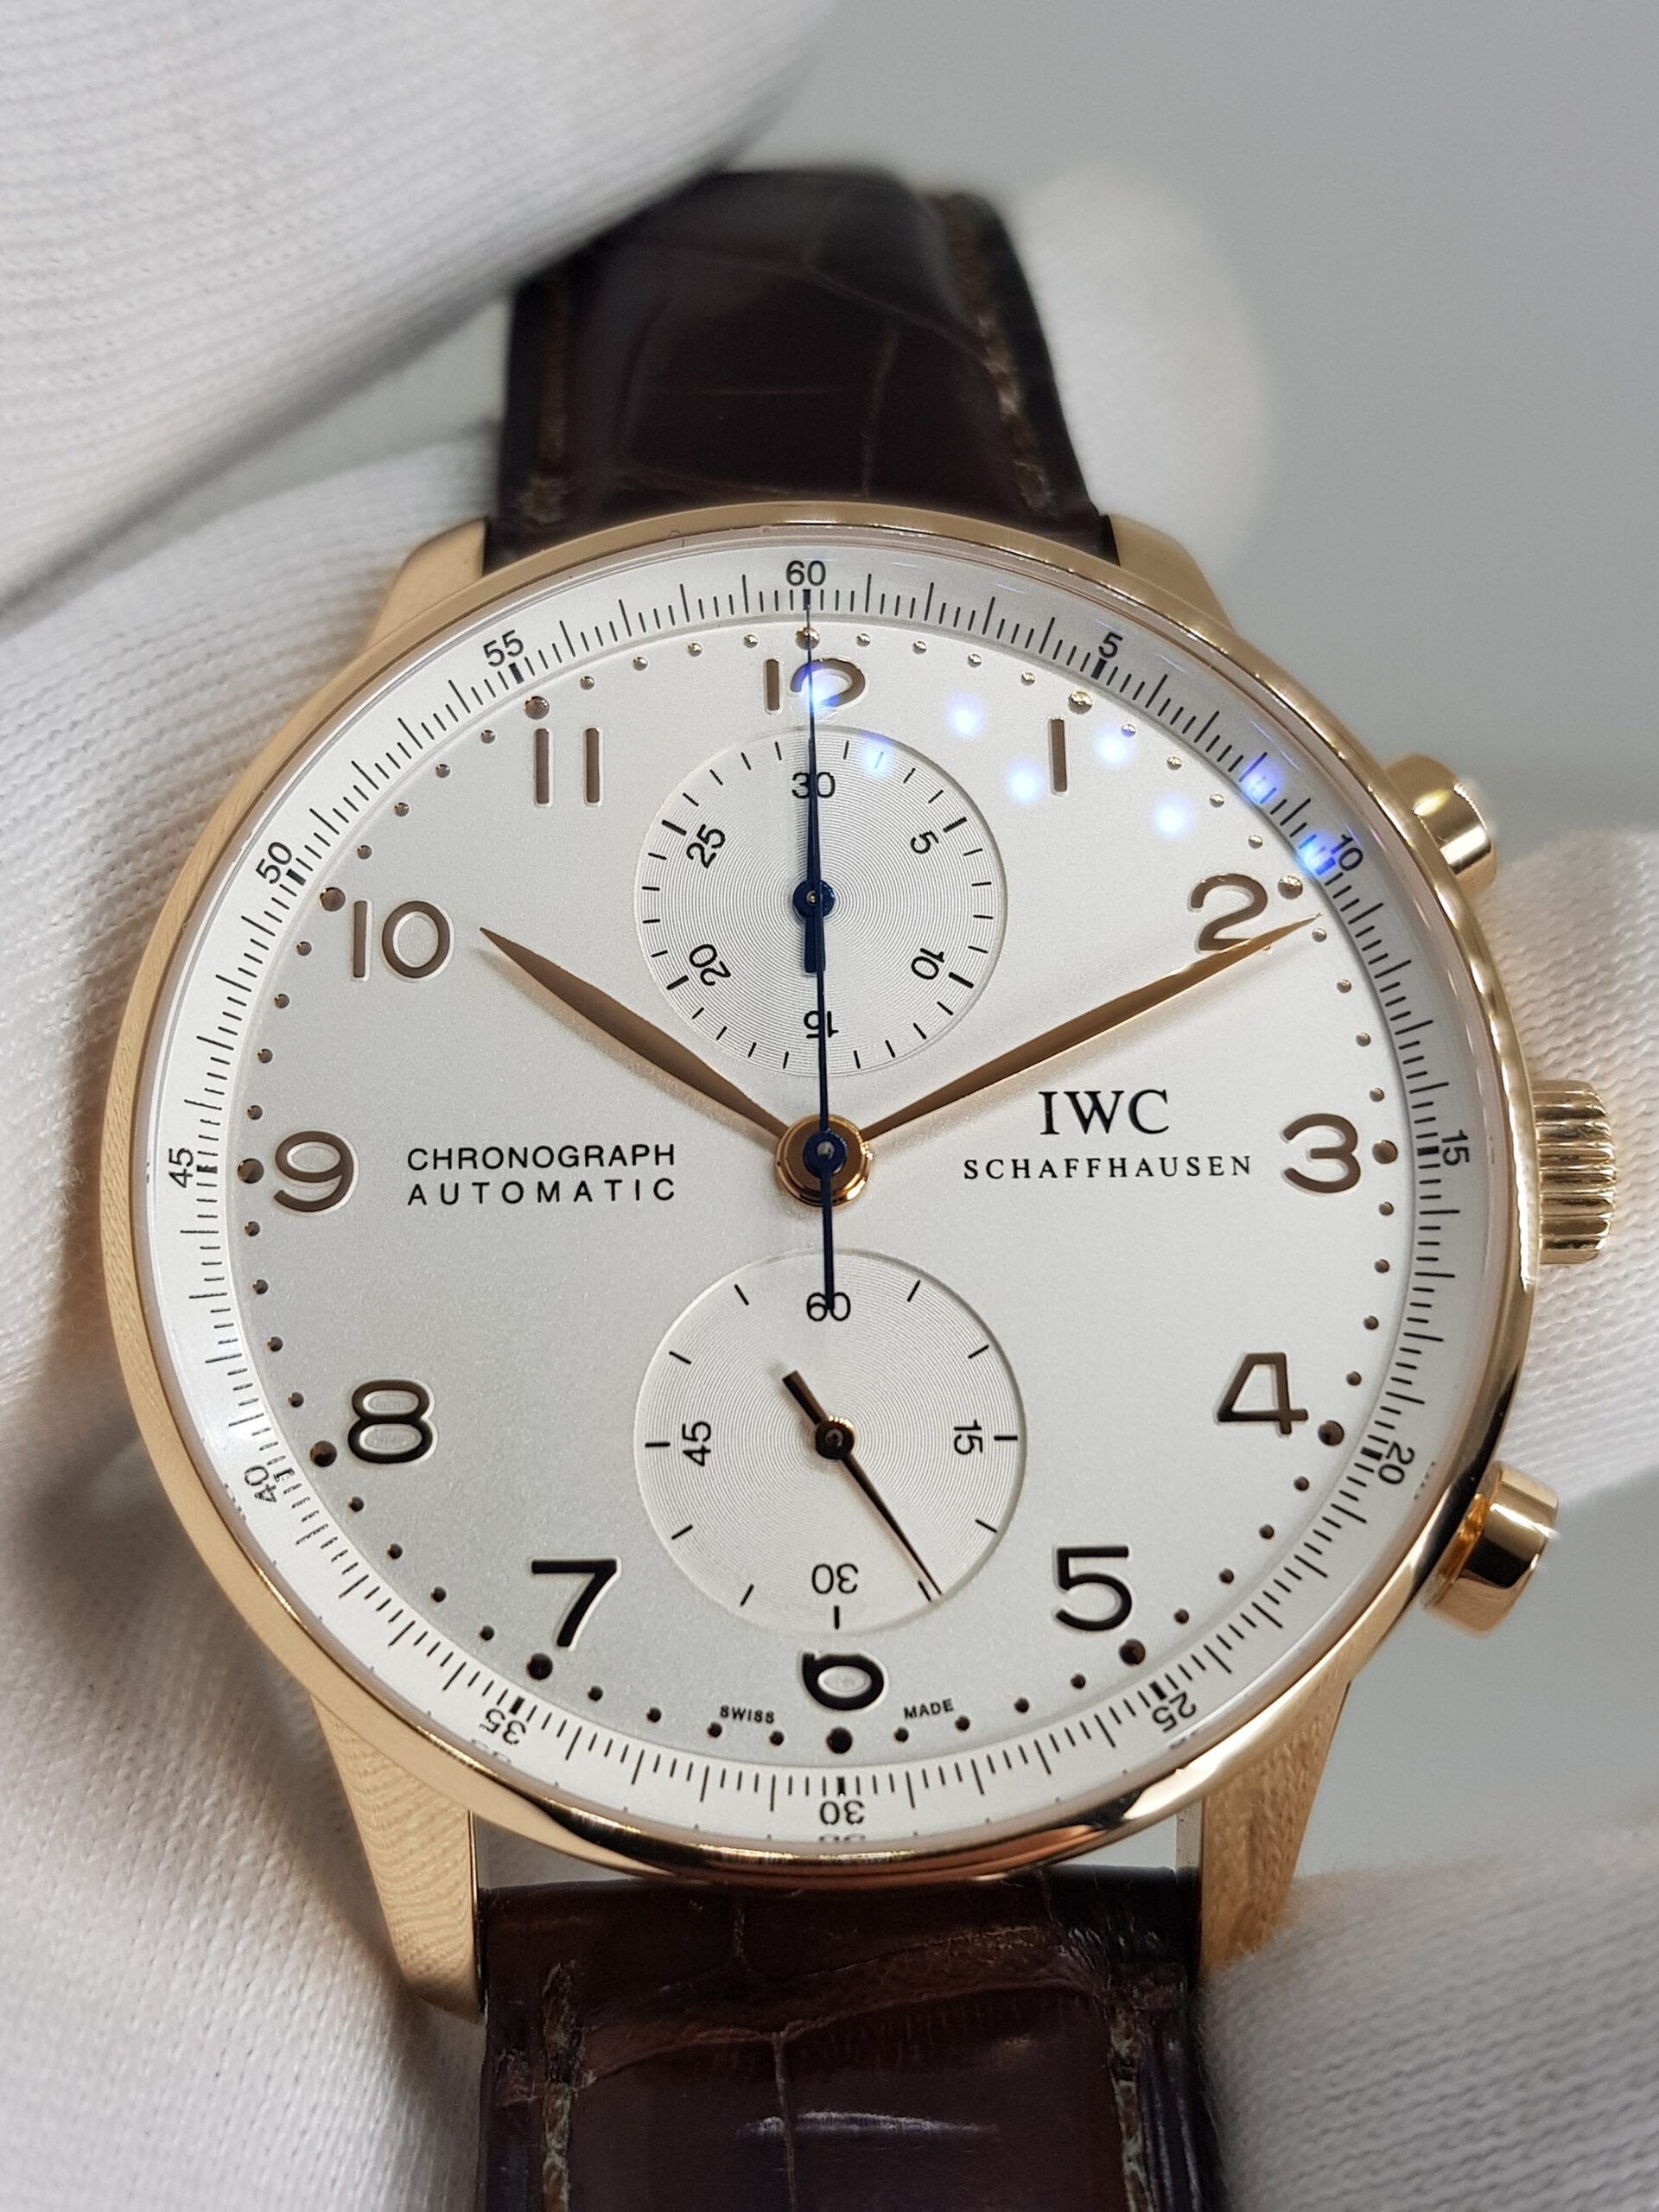 IWC Portugieser Chronograph Automatic IW371480 18k Rose Gold size 41mm